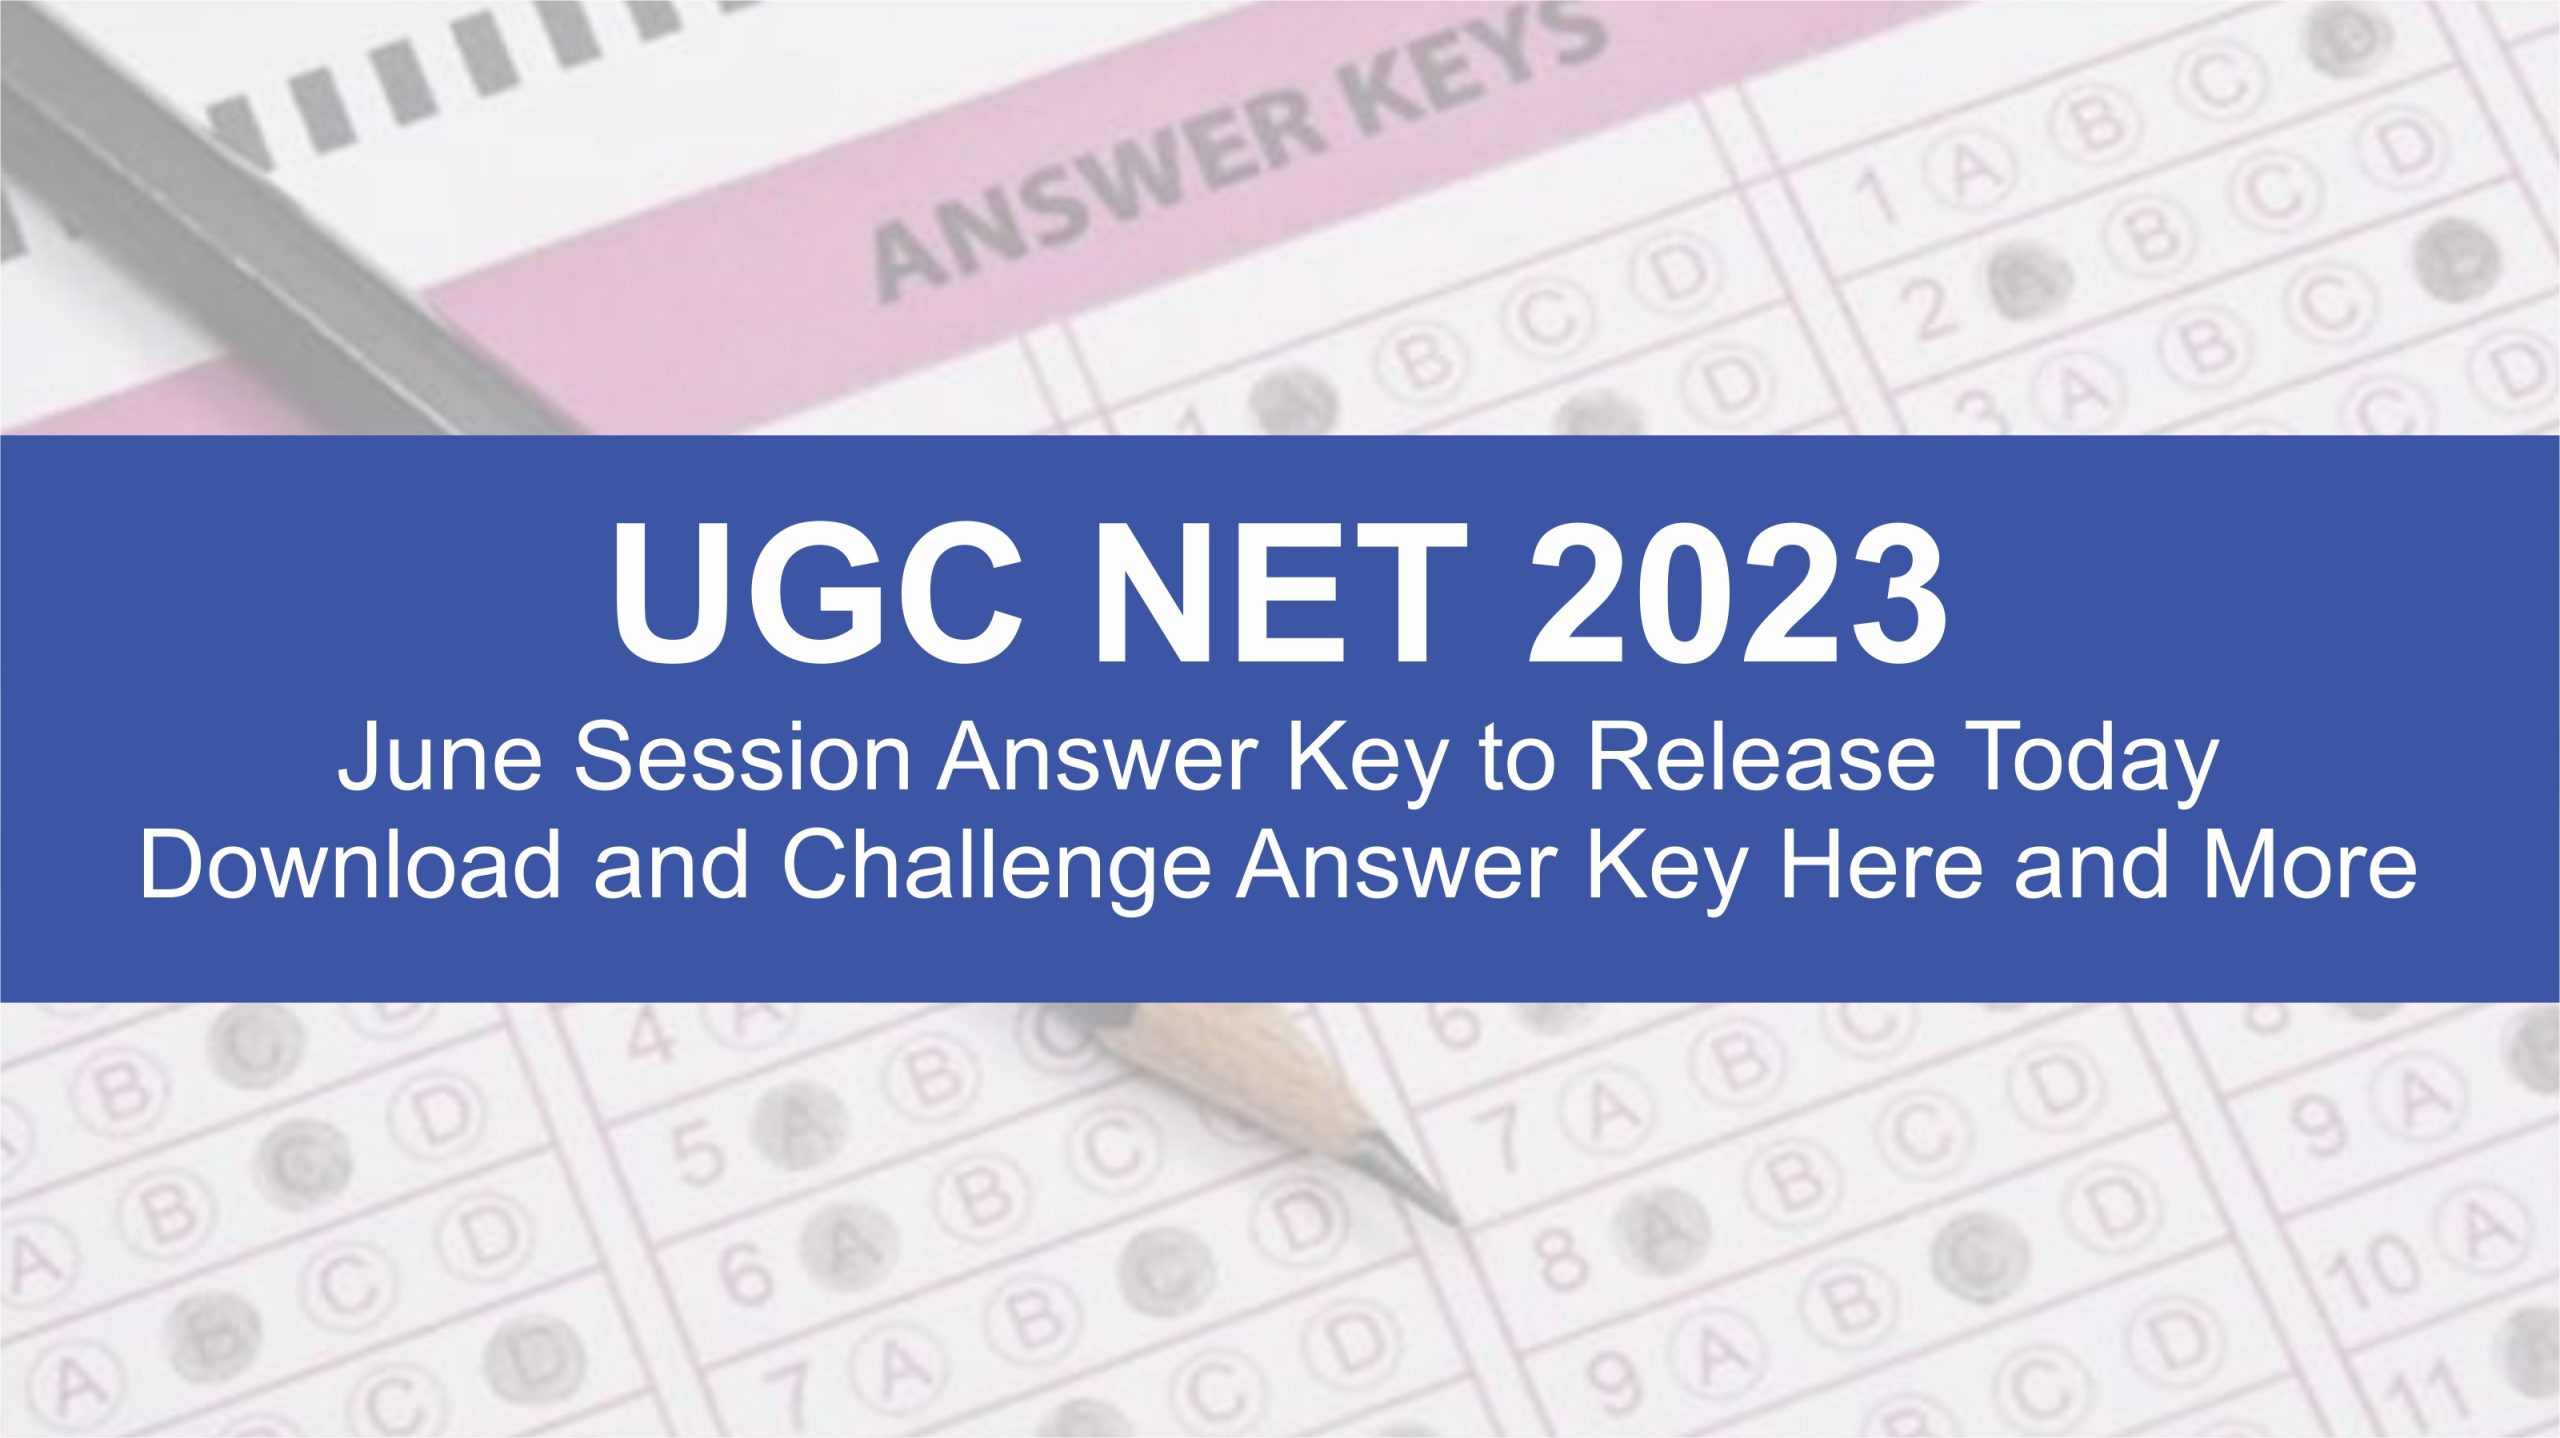 ugc-net-2023-june-session-answer-key-to-release-today-download-and